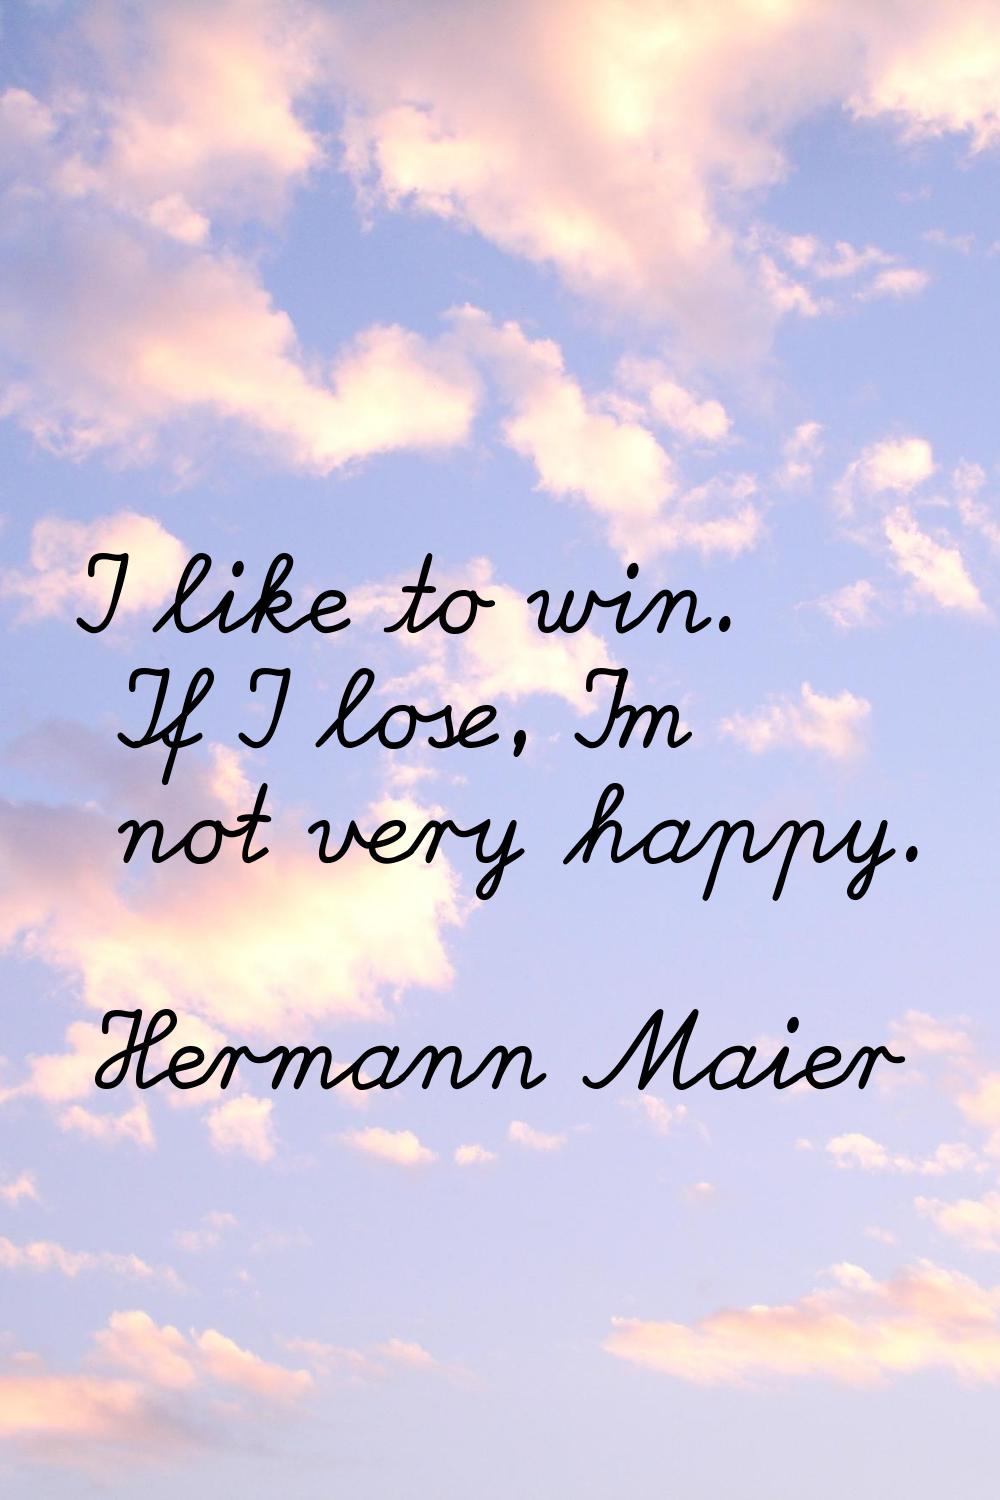 I like to win. If I lose, I'm not very happy.